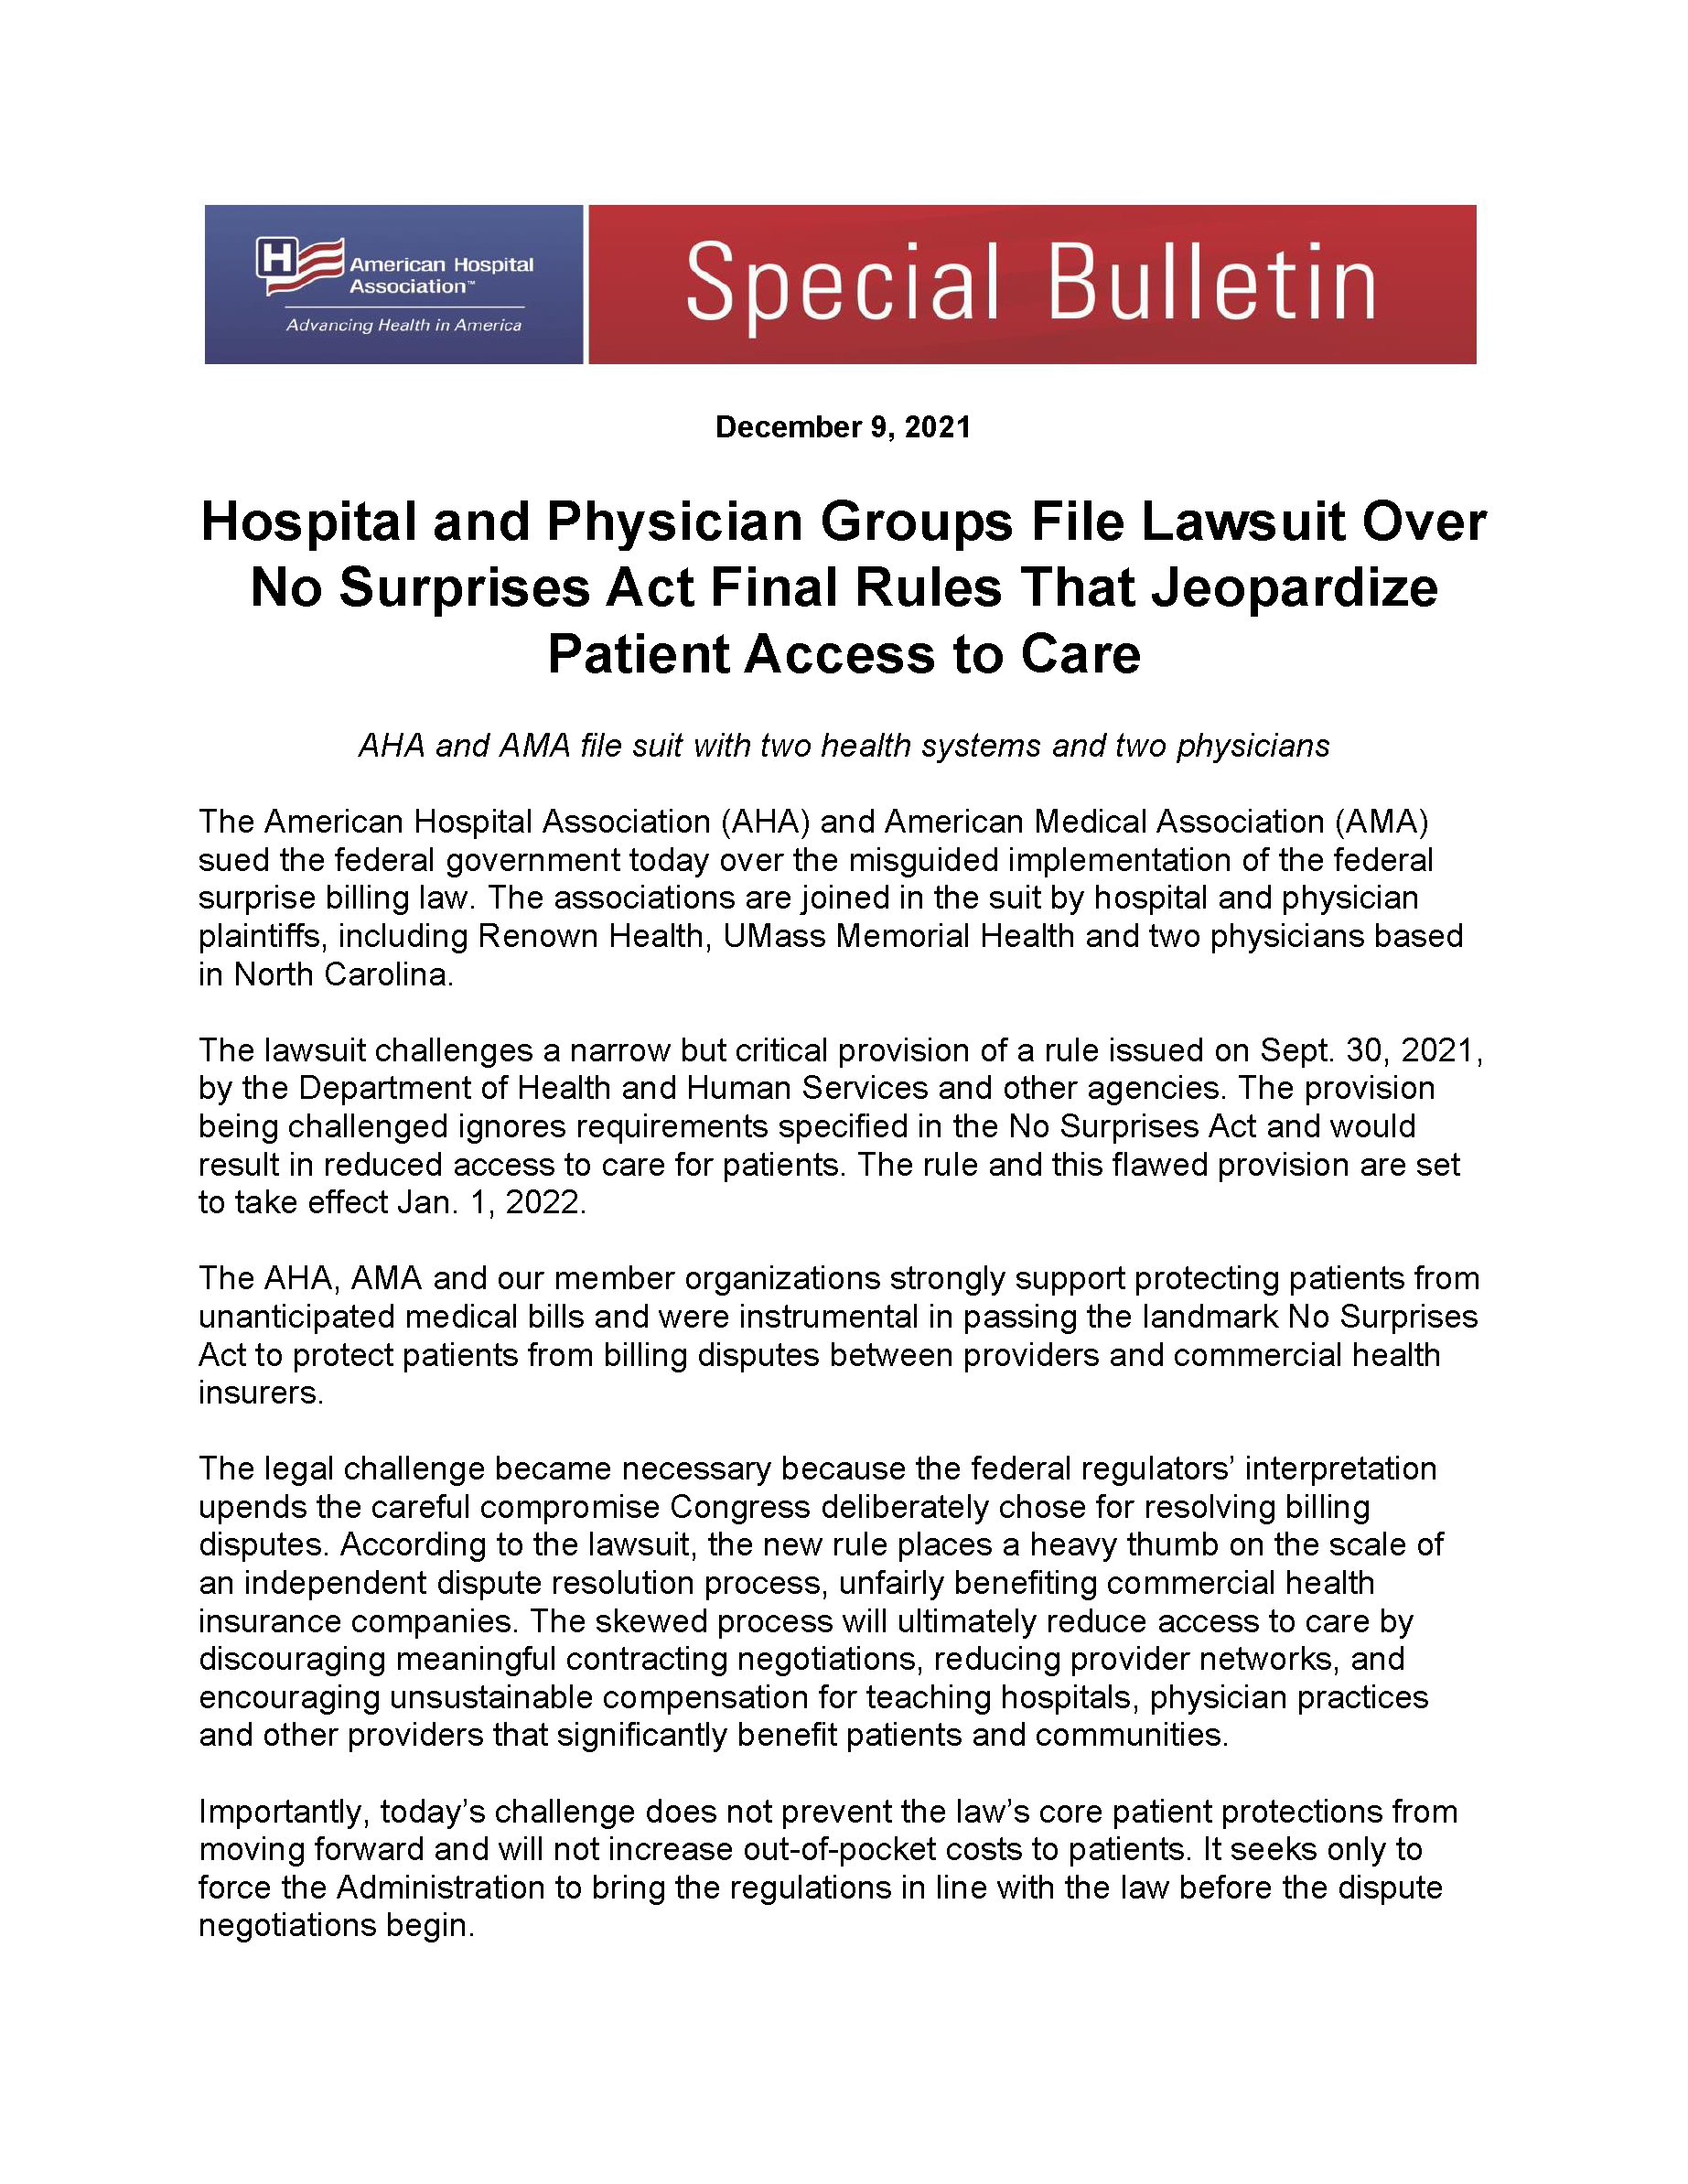 Special Bulletin: Hospital and Physician Groups File Lawsuit Over No Surprises Act Final Rules That Jeopardize Patient Access to Care page 1.